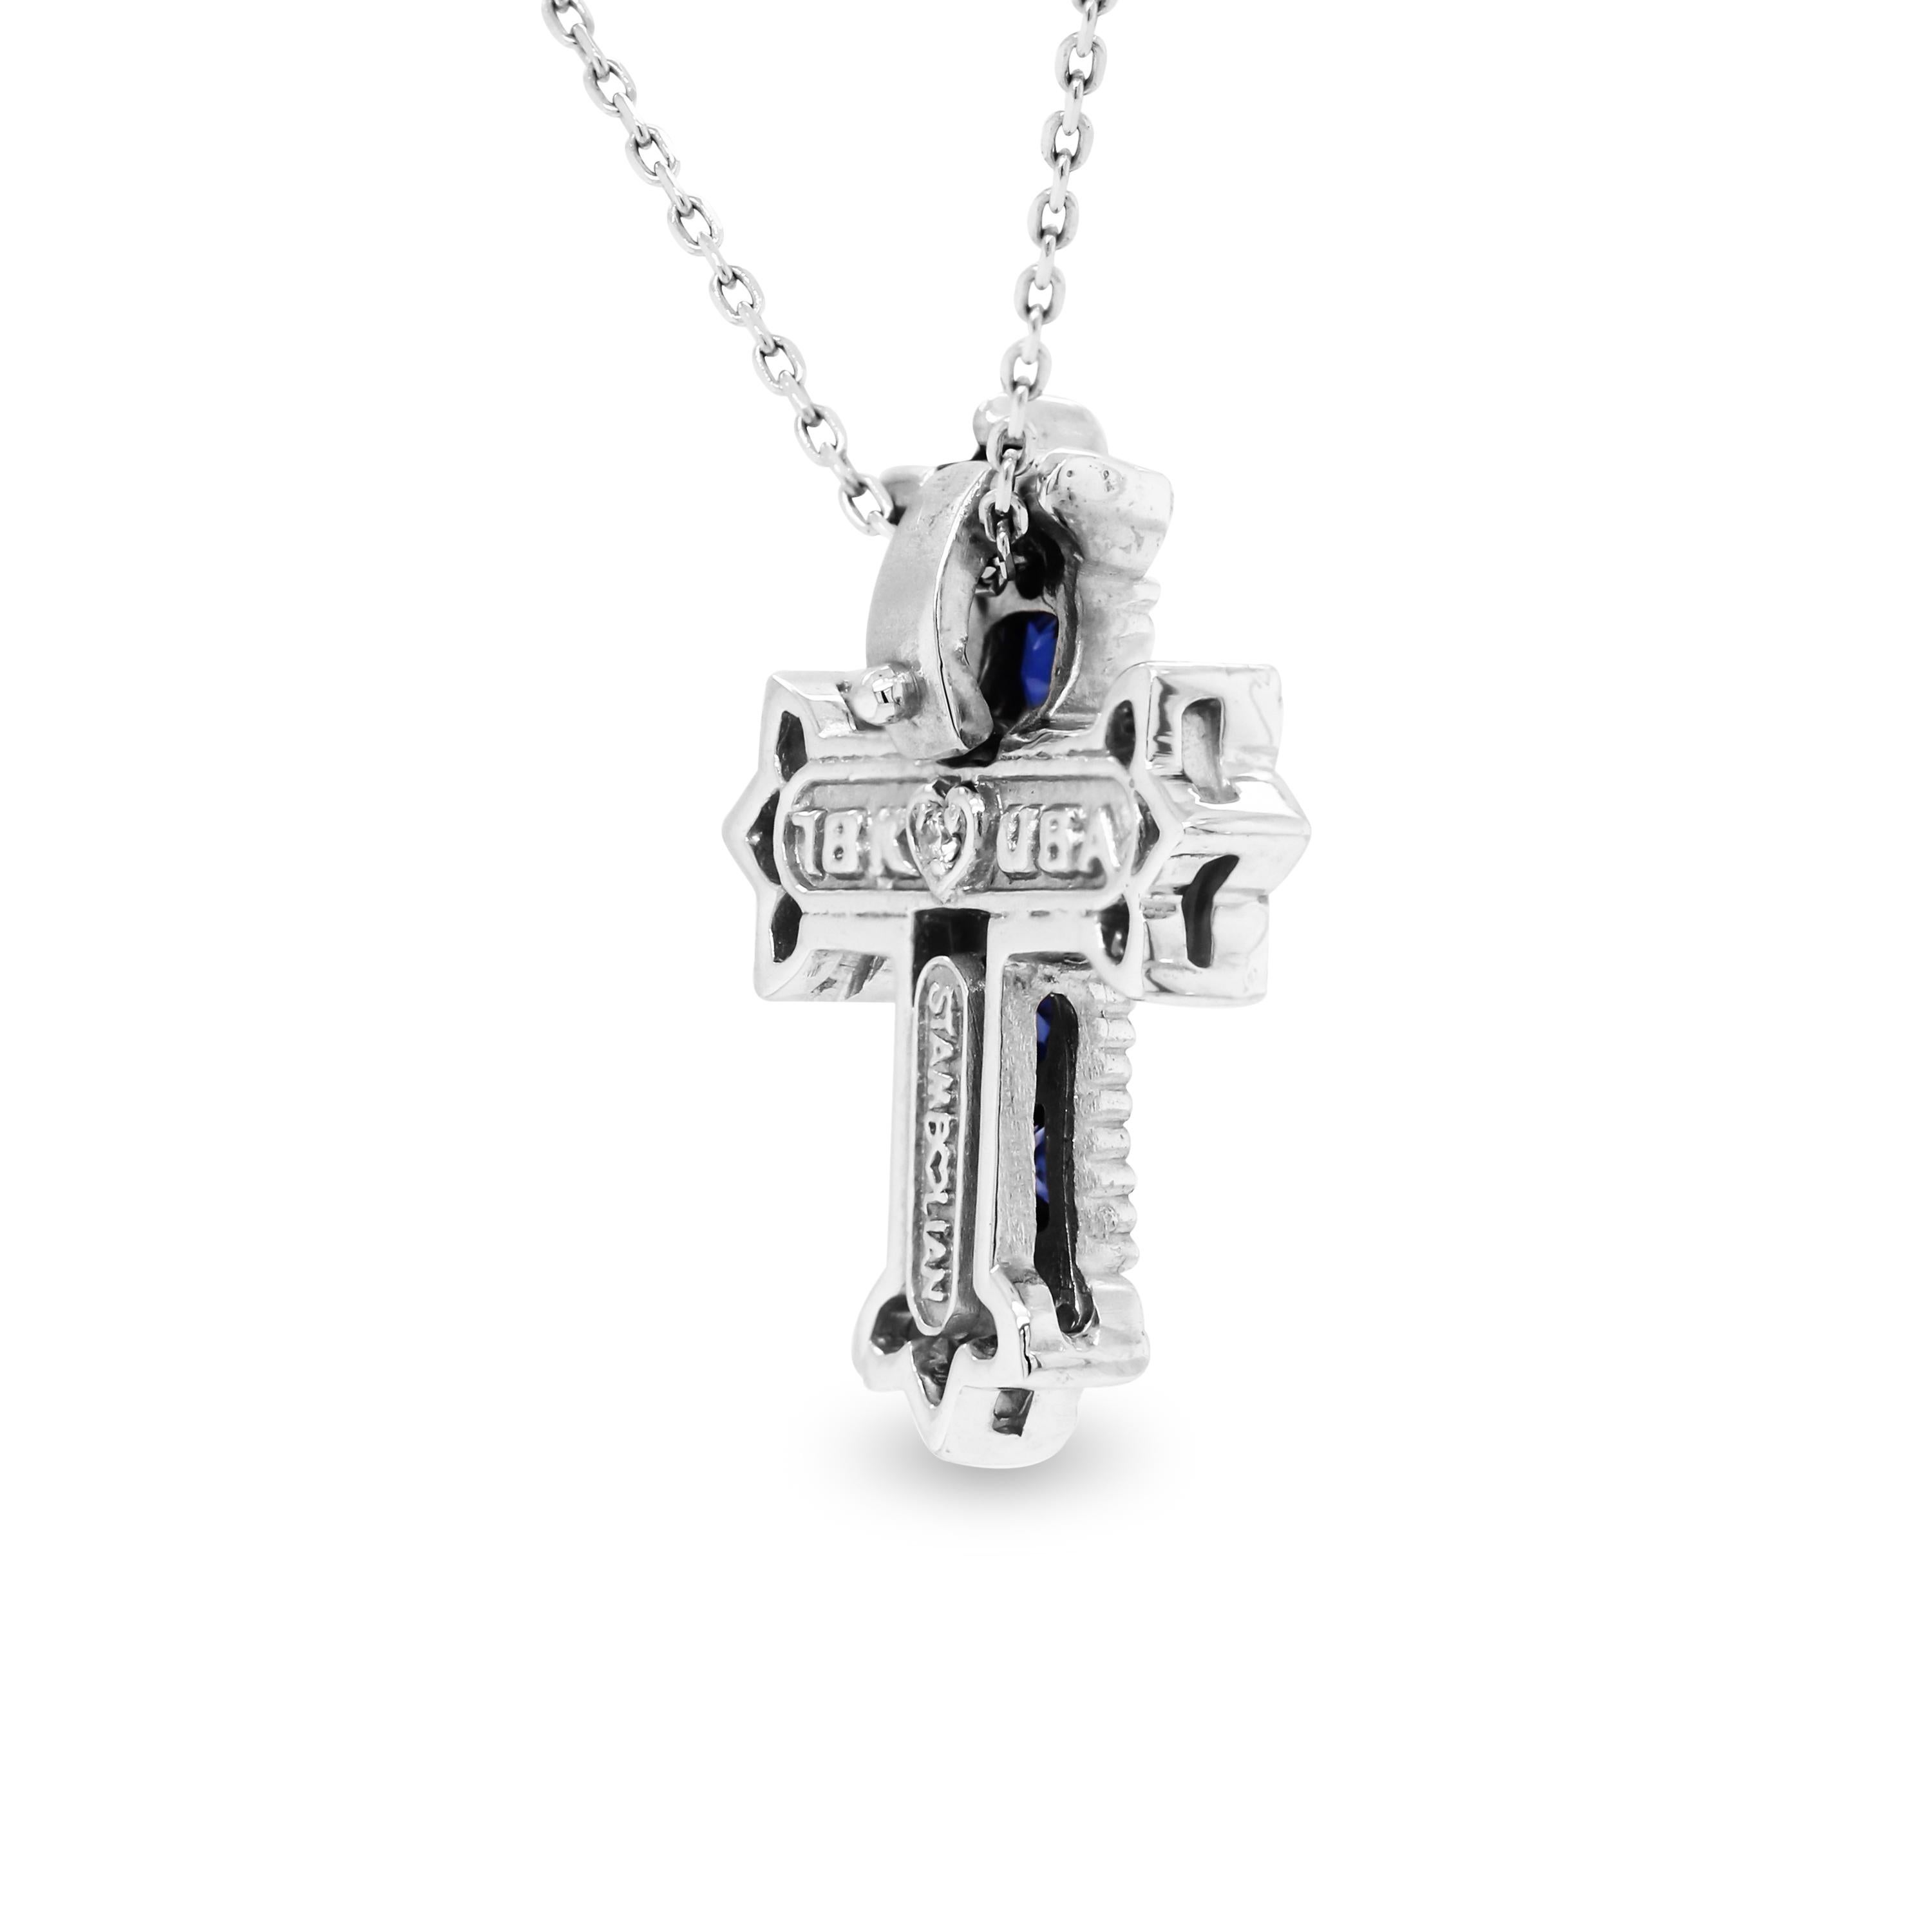 Stambolian Princess Cut Blue Sapphires Diamond 18K White Gold Cross Pendant Necklace

0.27 carat G color, VS clarity diamonds total weight.  
1.50 carat Princess Cut, Blue Sapphires total weight.

Cross is 0.80 inch in length from top to bottom.